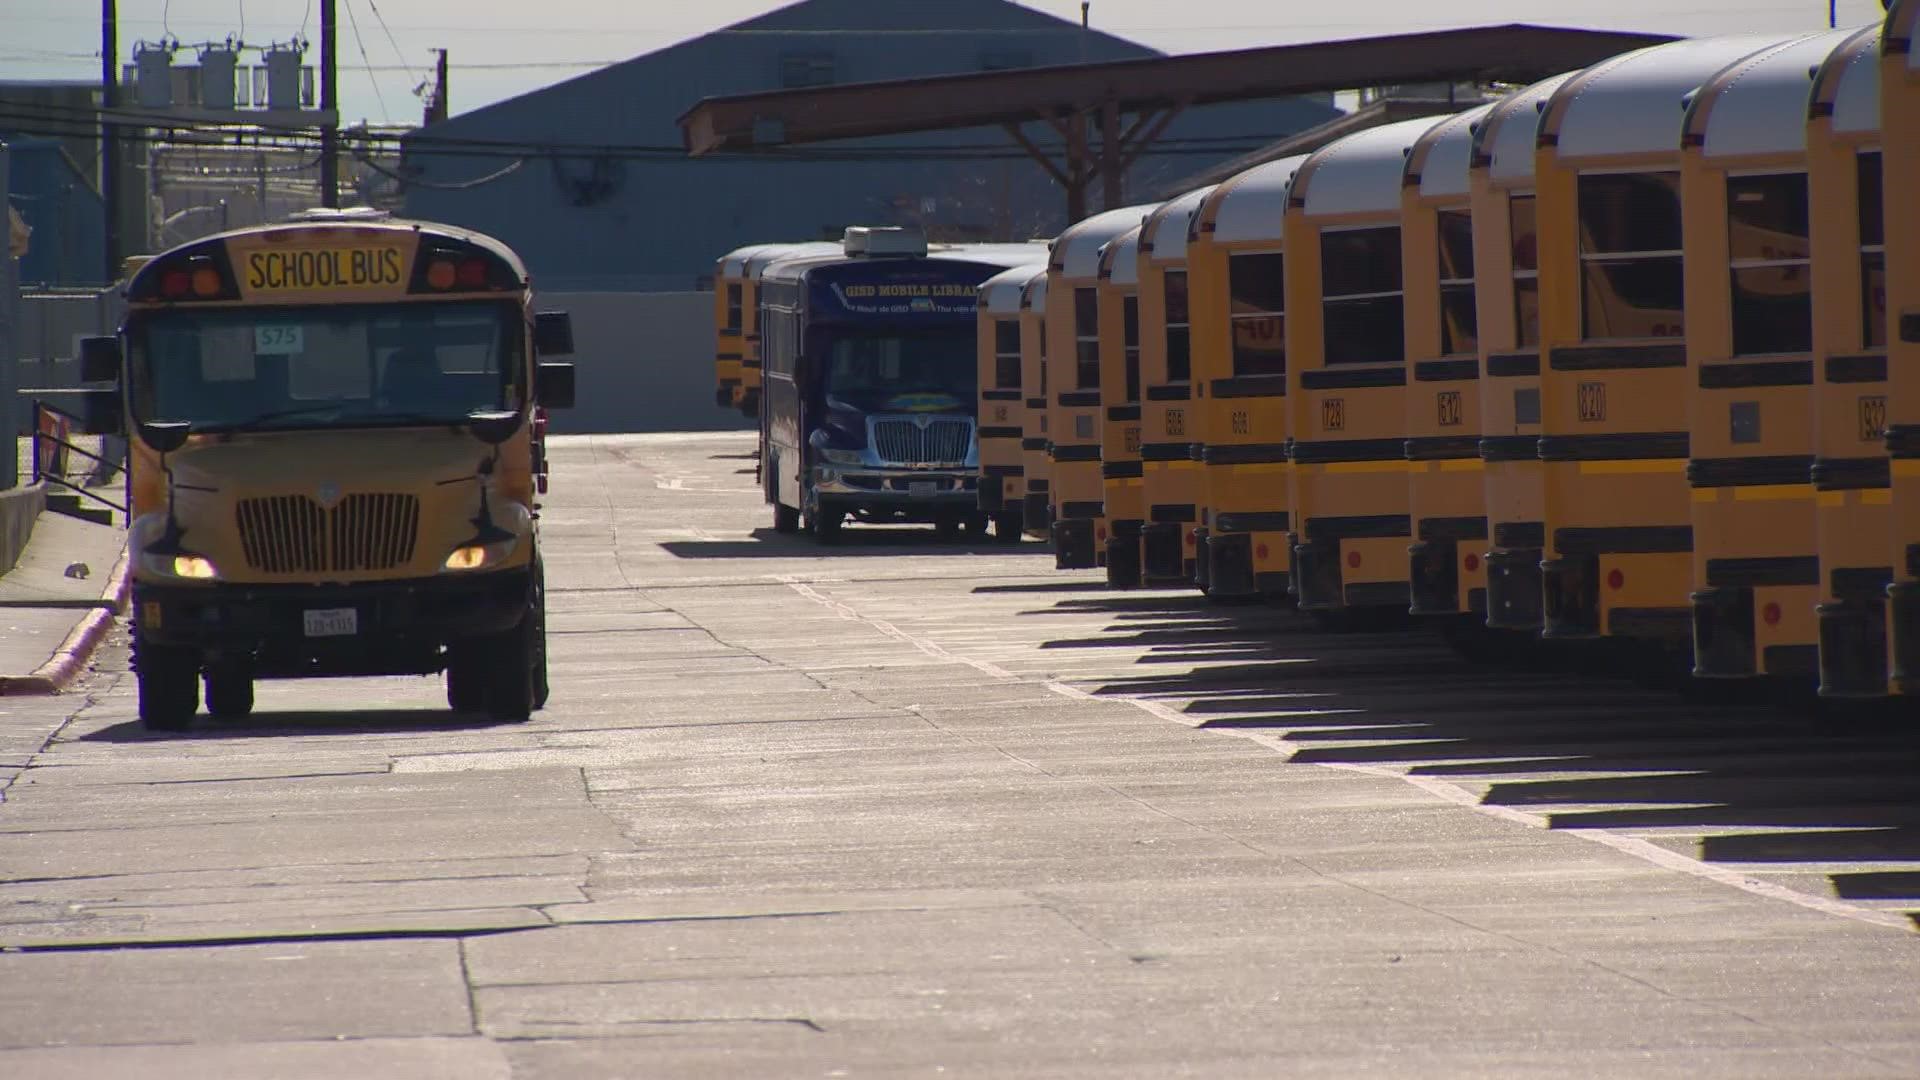 Plano ISD and Garland ISD reported school bus delays Monday, while some districts are dealing with a shortage of substitute teachers.